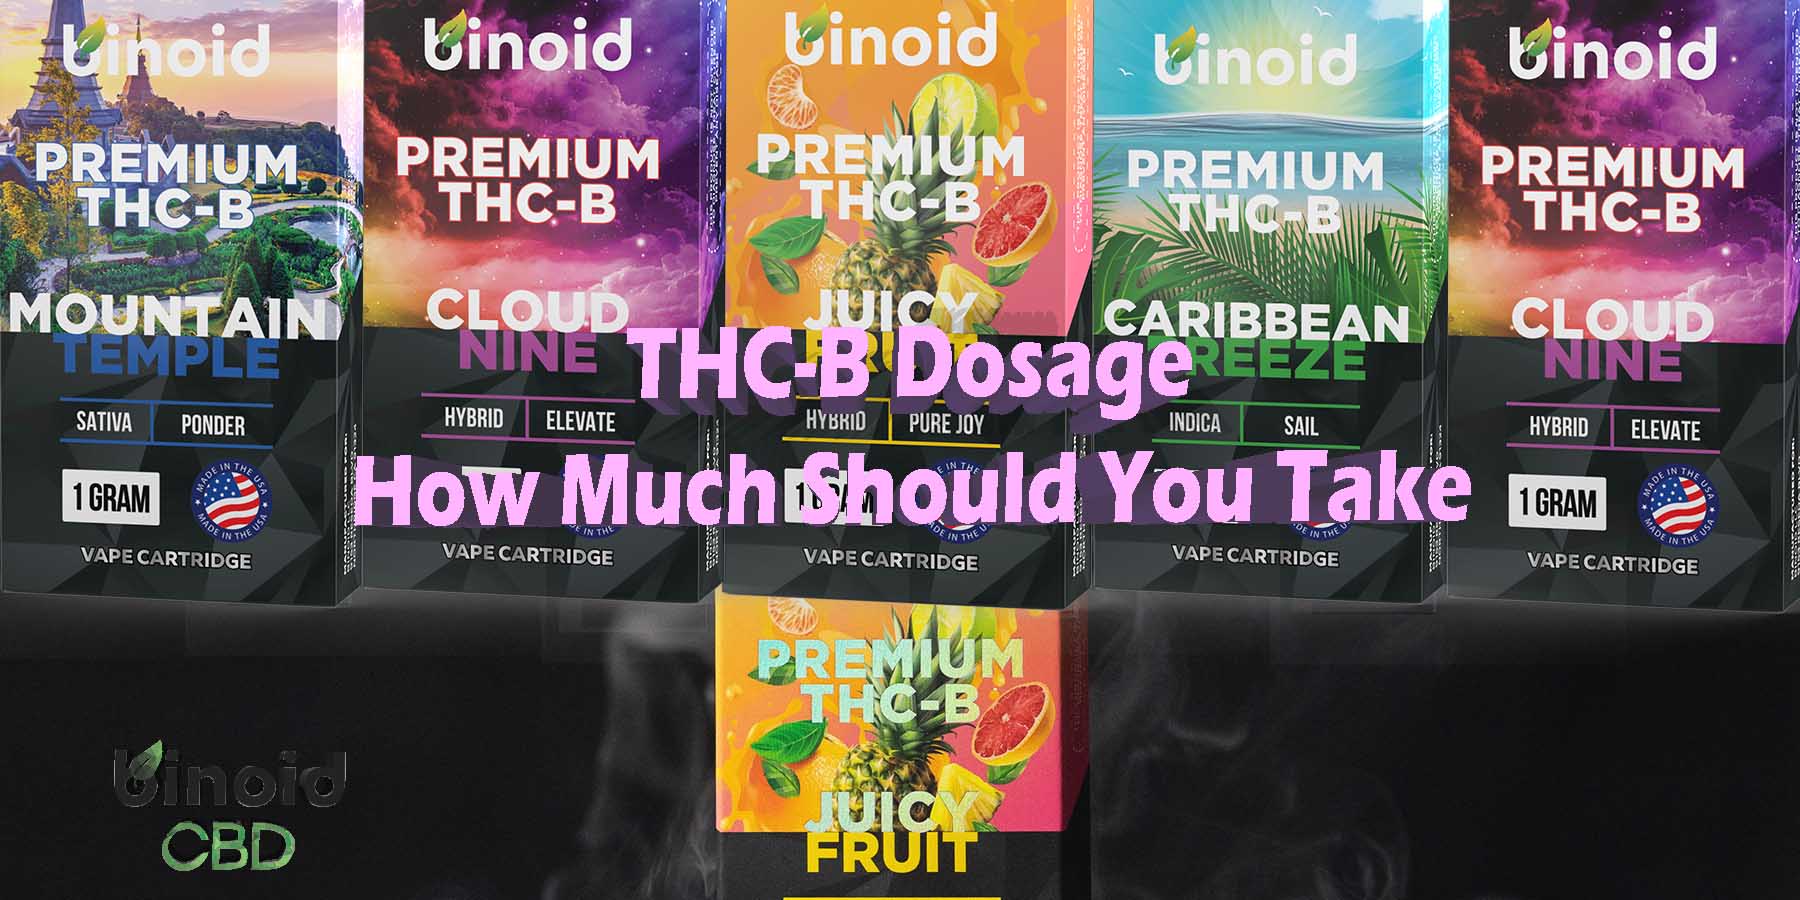 THC-B Dosage How Much Should You Take Online Best Brand Price Get Near Me Lowest Coupon Discount Store Shop Vapes Carts Online Best Brand Strongest Get Near Me How To Get Binoid